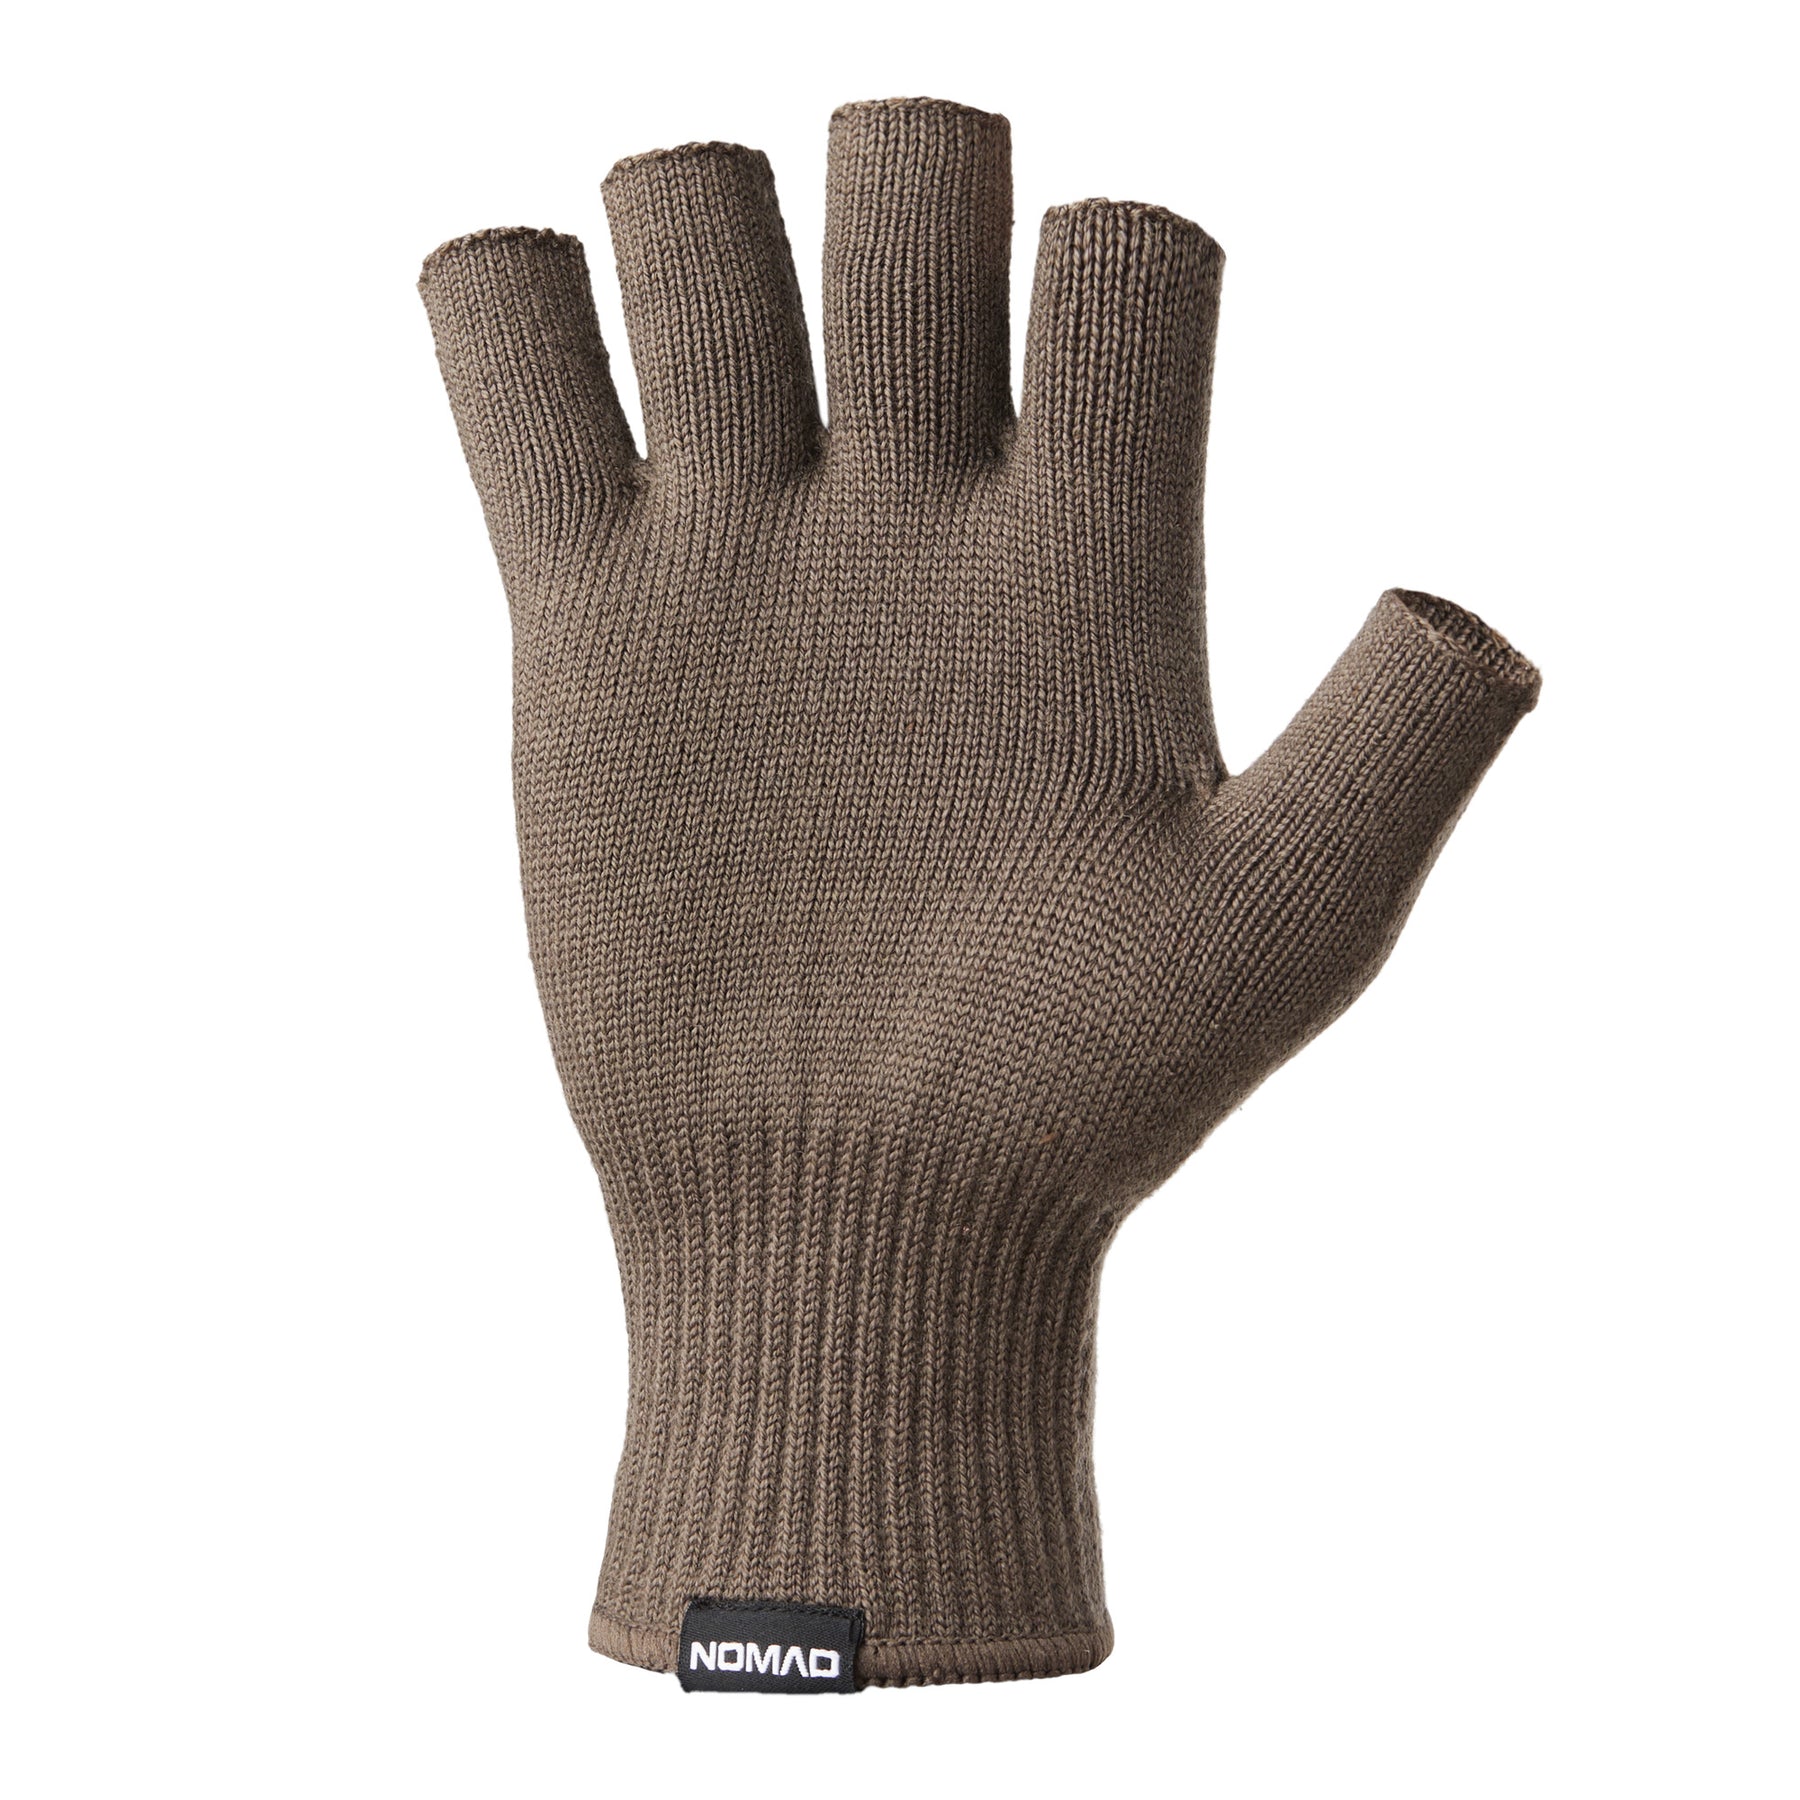 Nomad Durawool Glove – NOMAD Outdoor